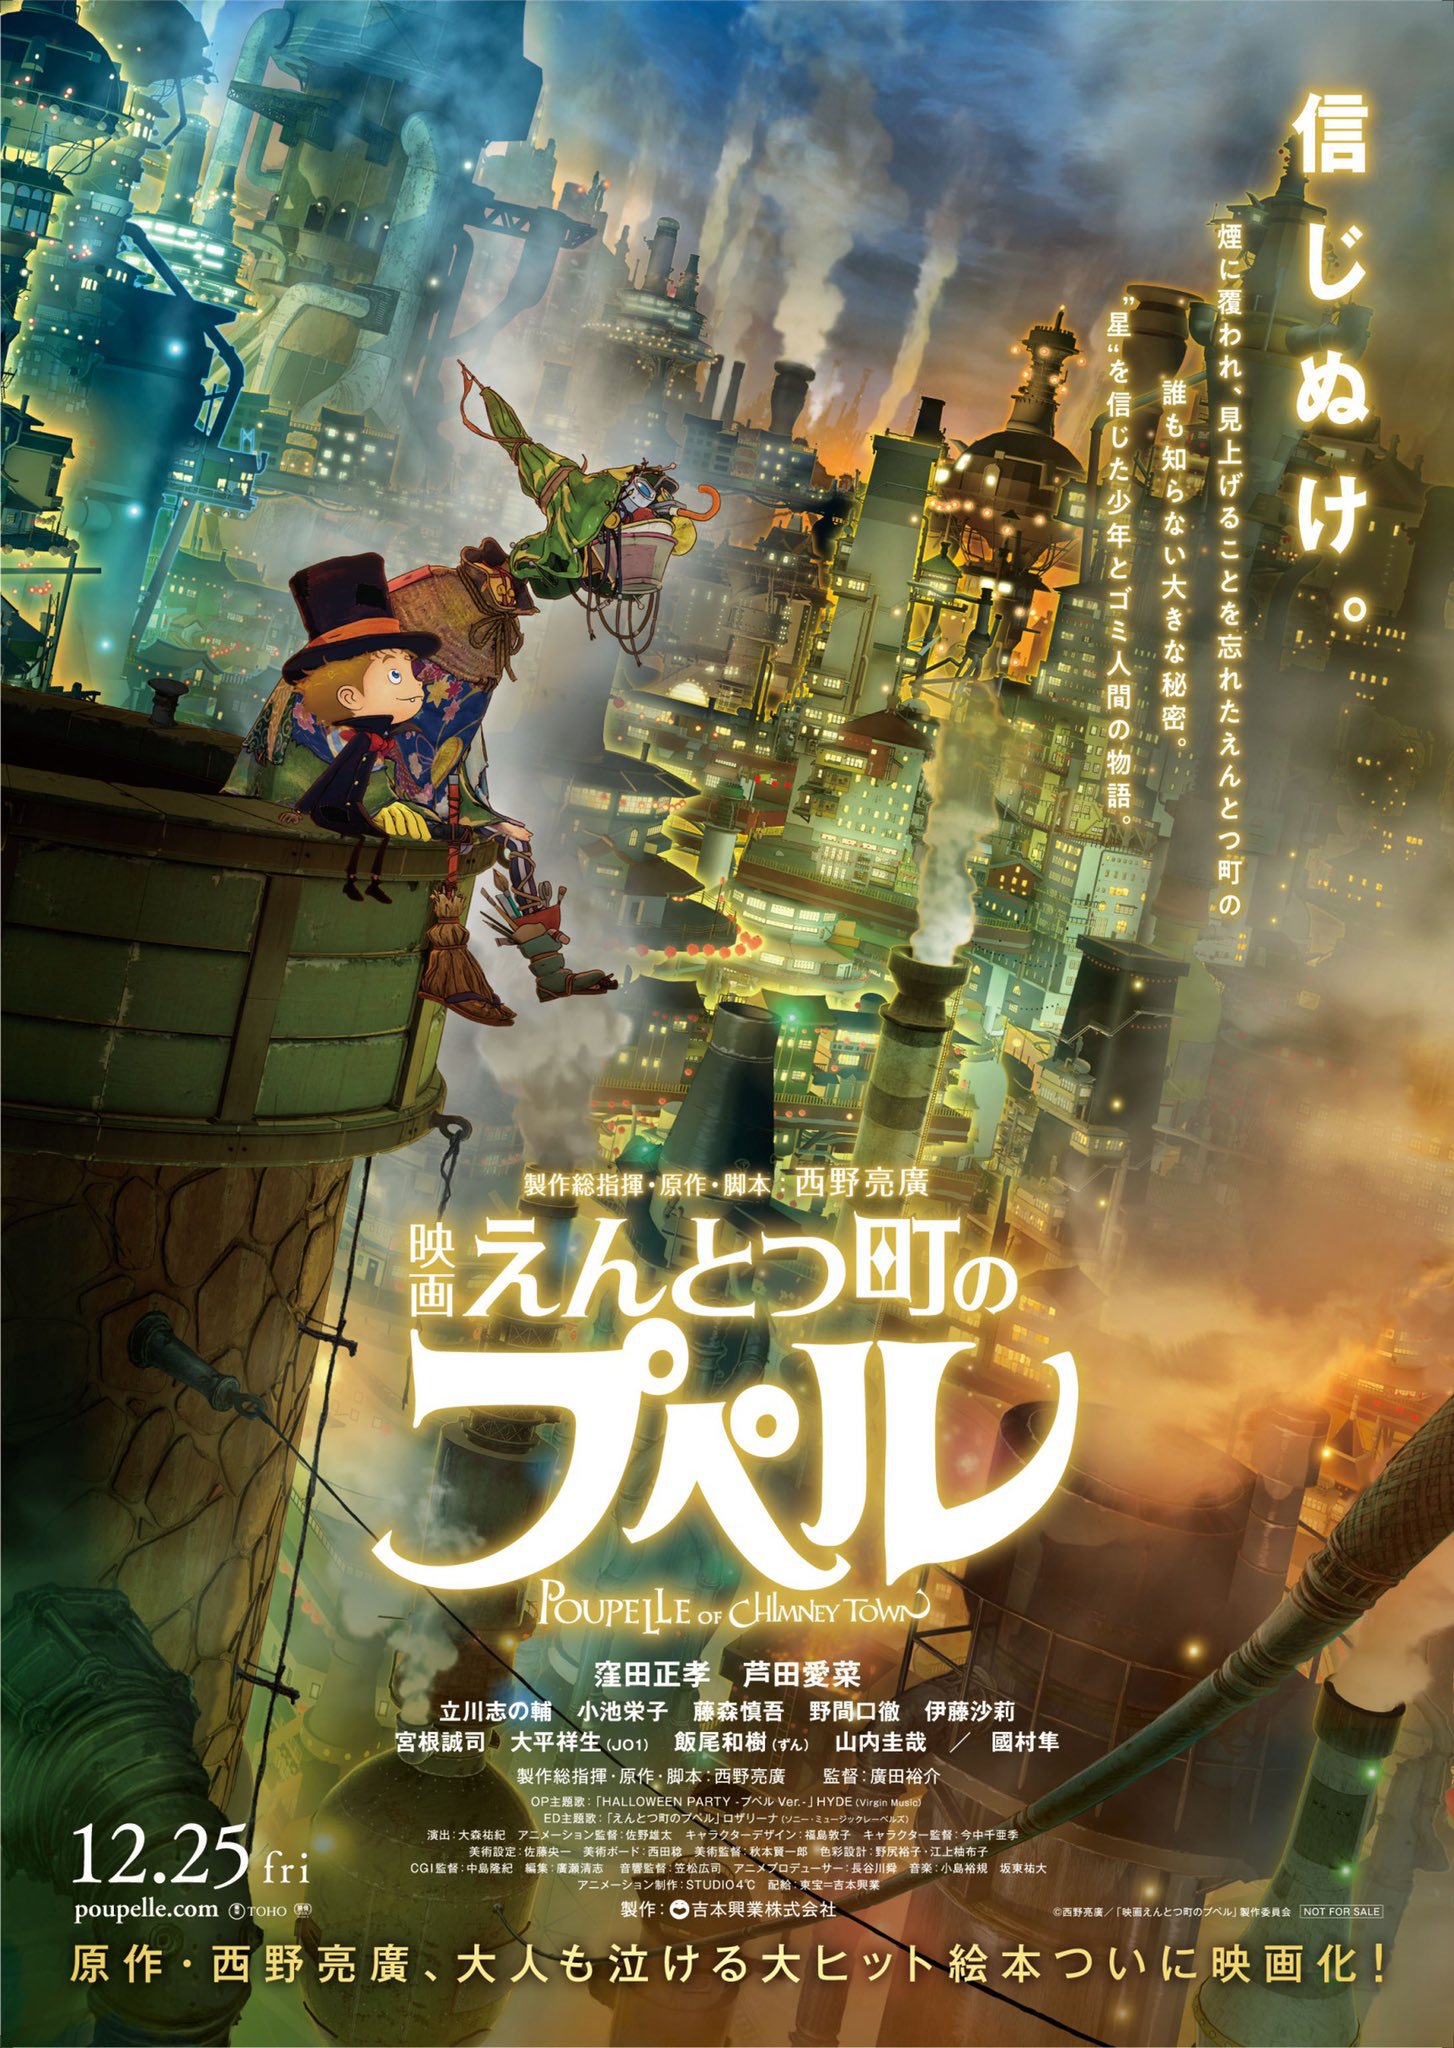 Japan Academy Film Prize 2021 - Poupelle of Chimney Town